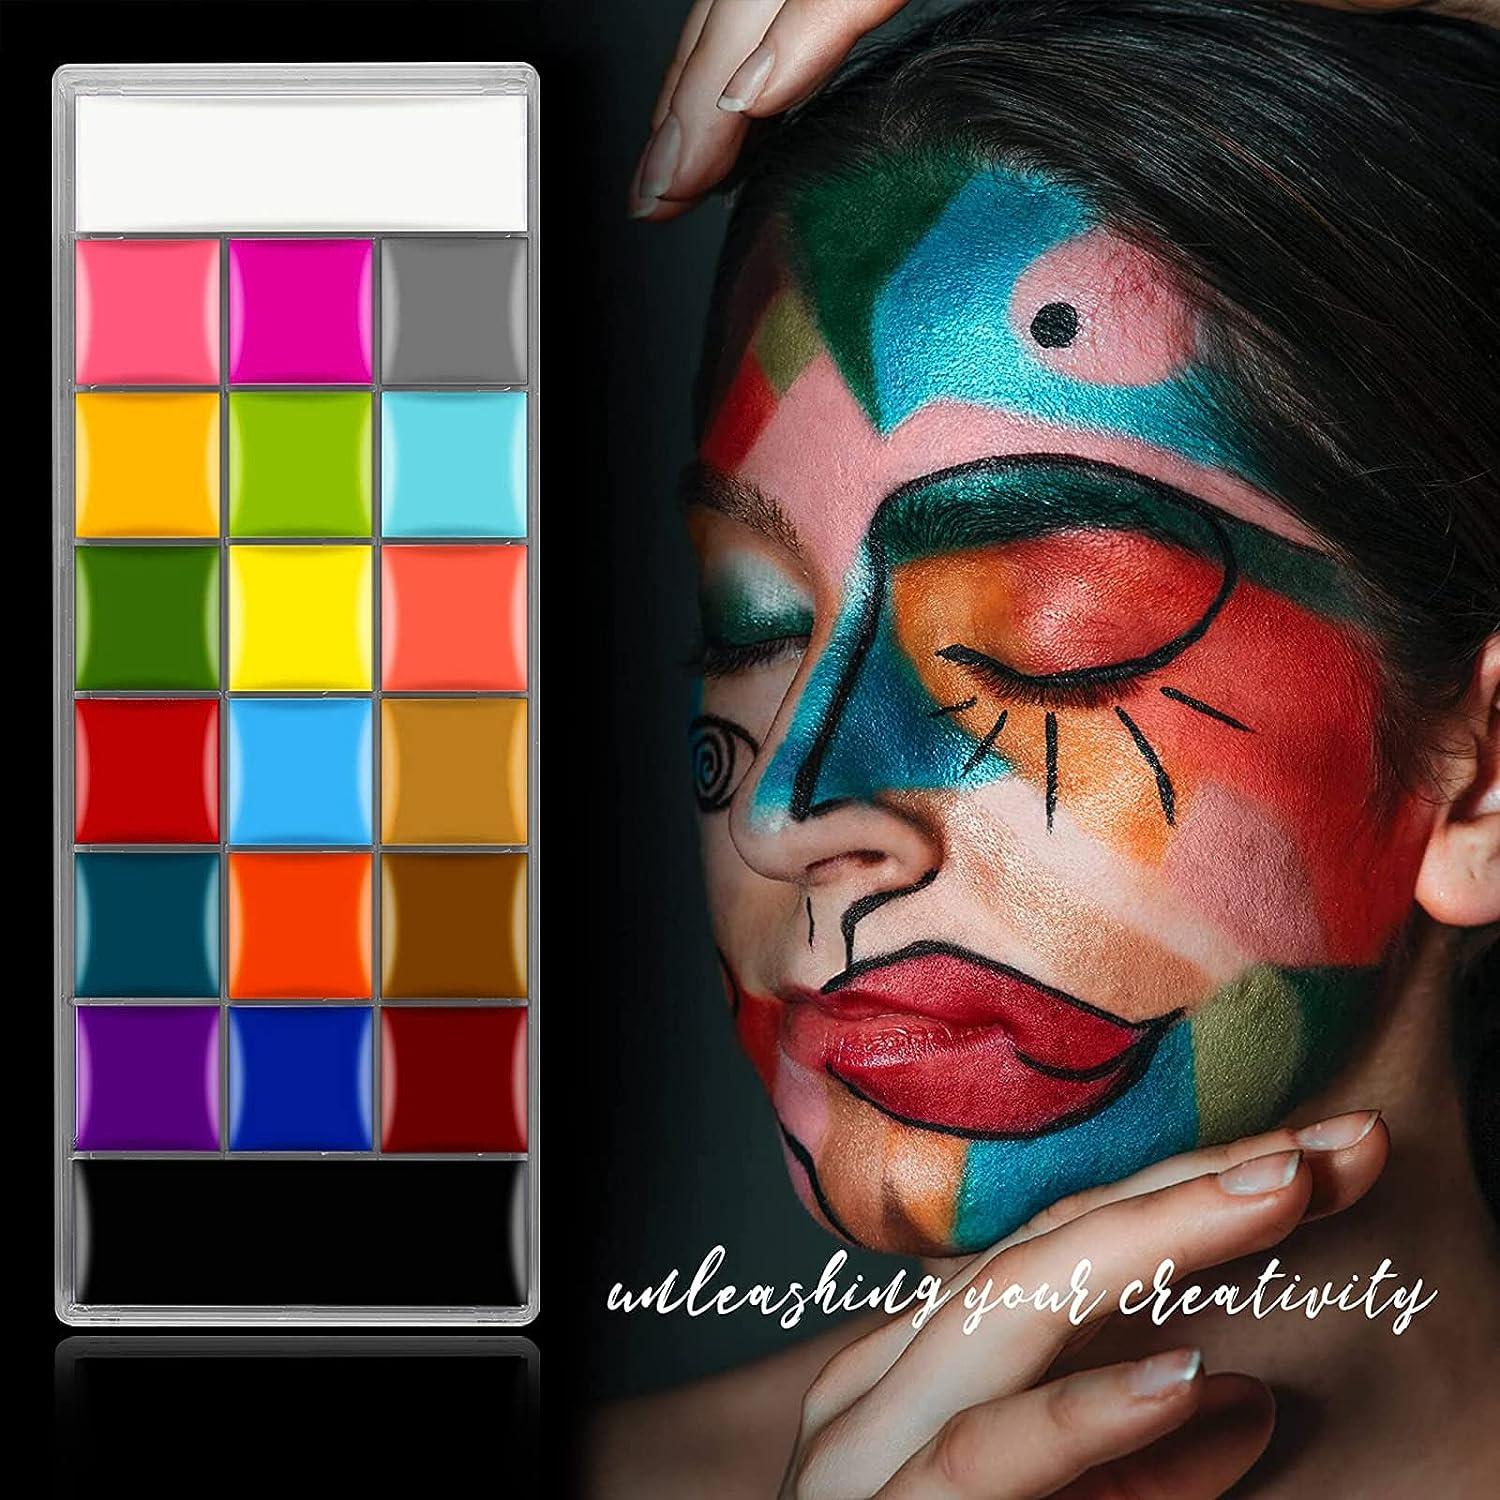 Travelwant 20 Colors Face Body Paint Oil Professional Flash Non-Toxic  Hypoallergenic Halloween Artist Fancy Cosplay Party SFX Face Painting  Palette Kit for Adults Girls 